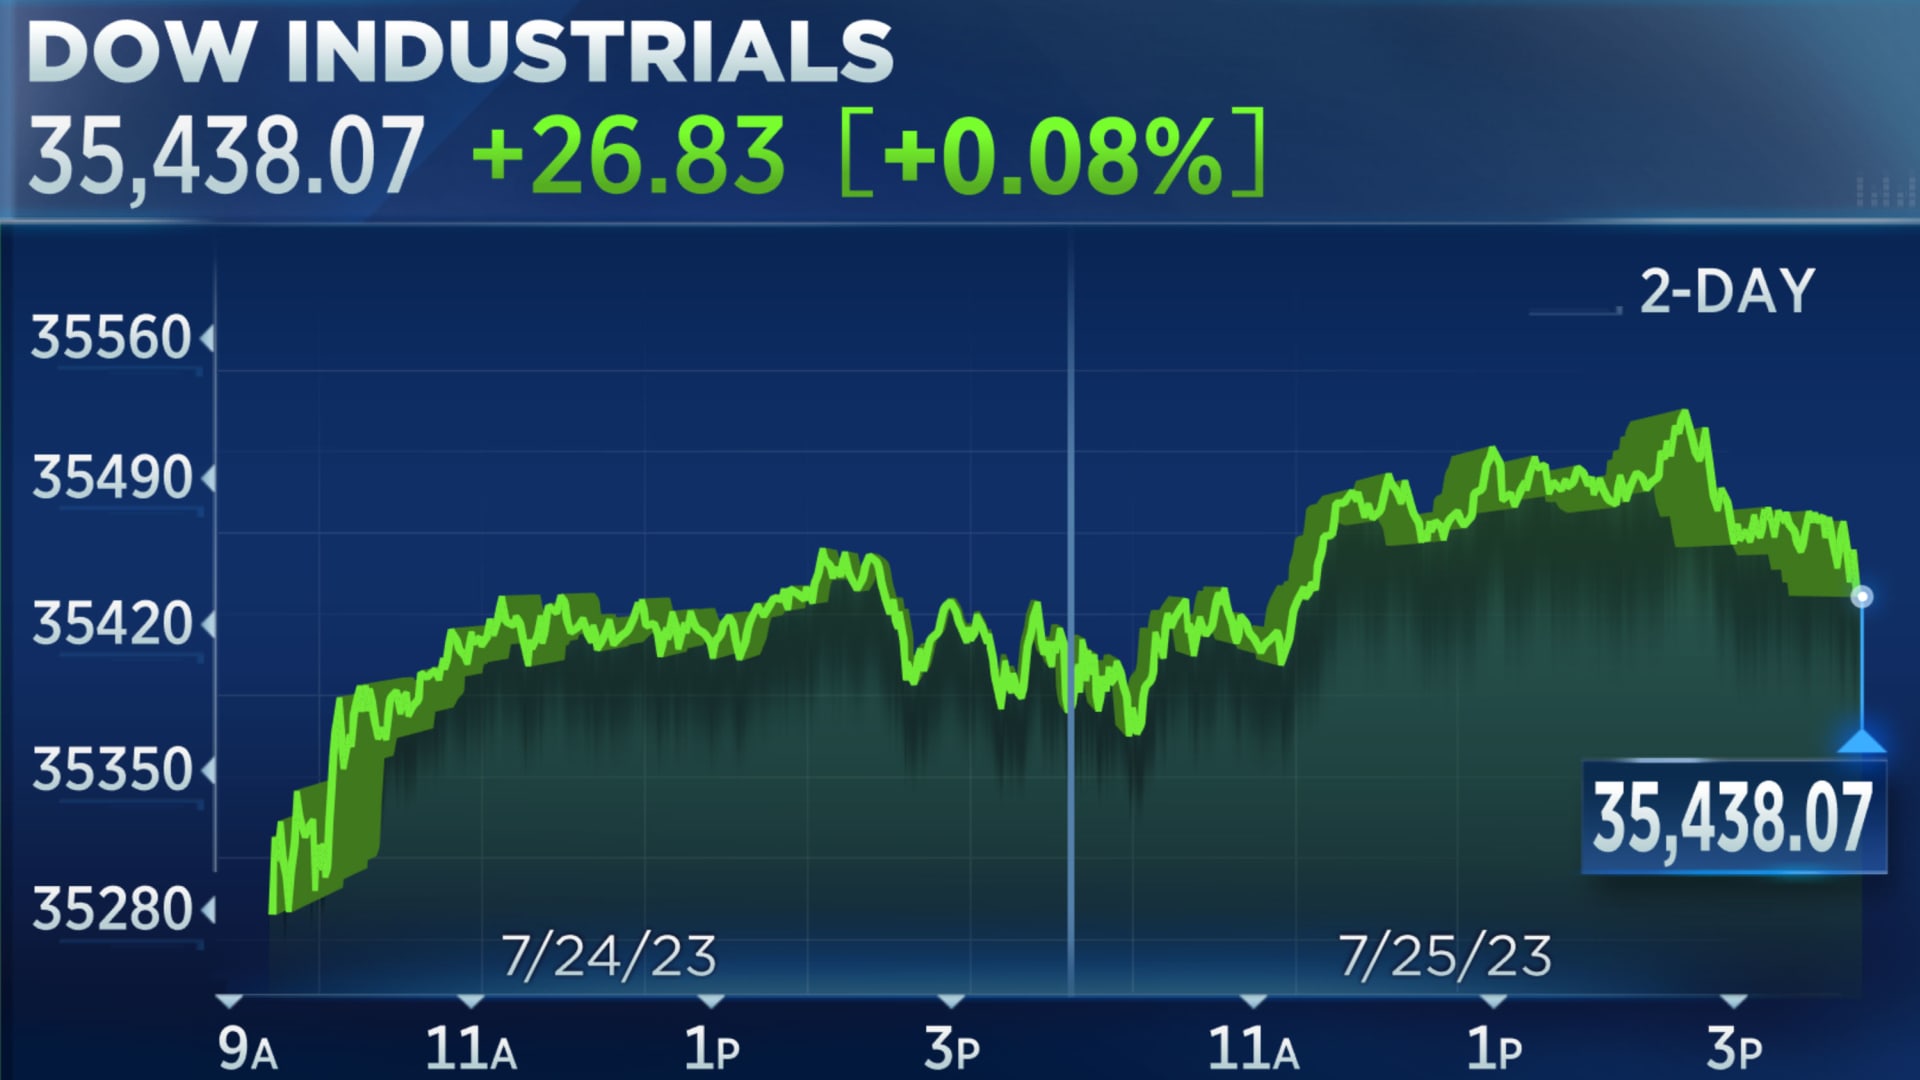 Dow closes higher for 12th straight day, registers longest rally since February 2017: Live updates